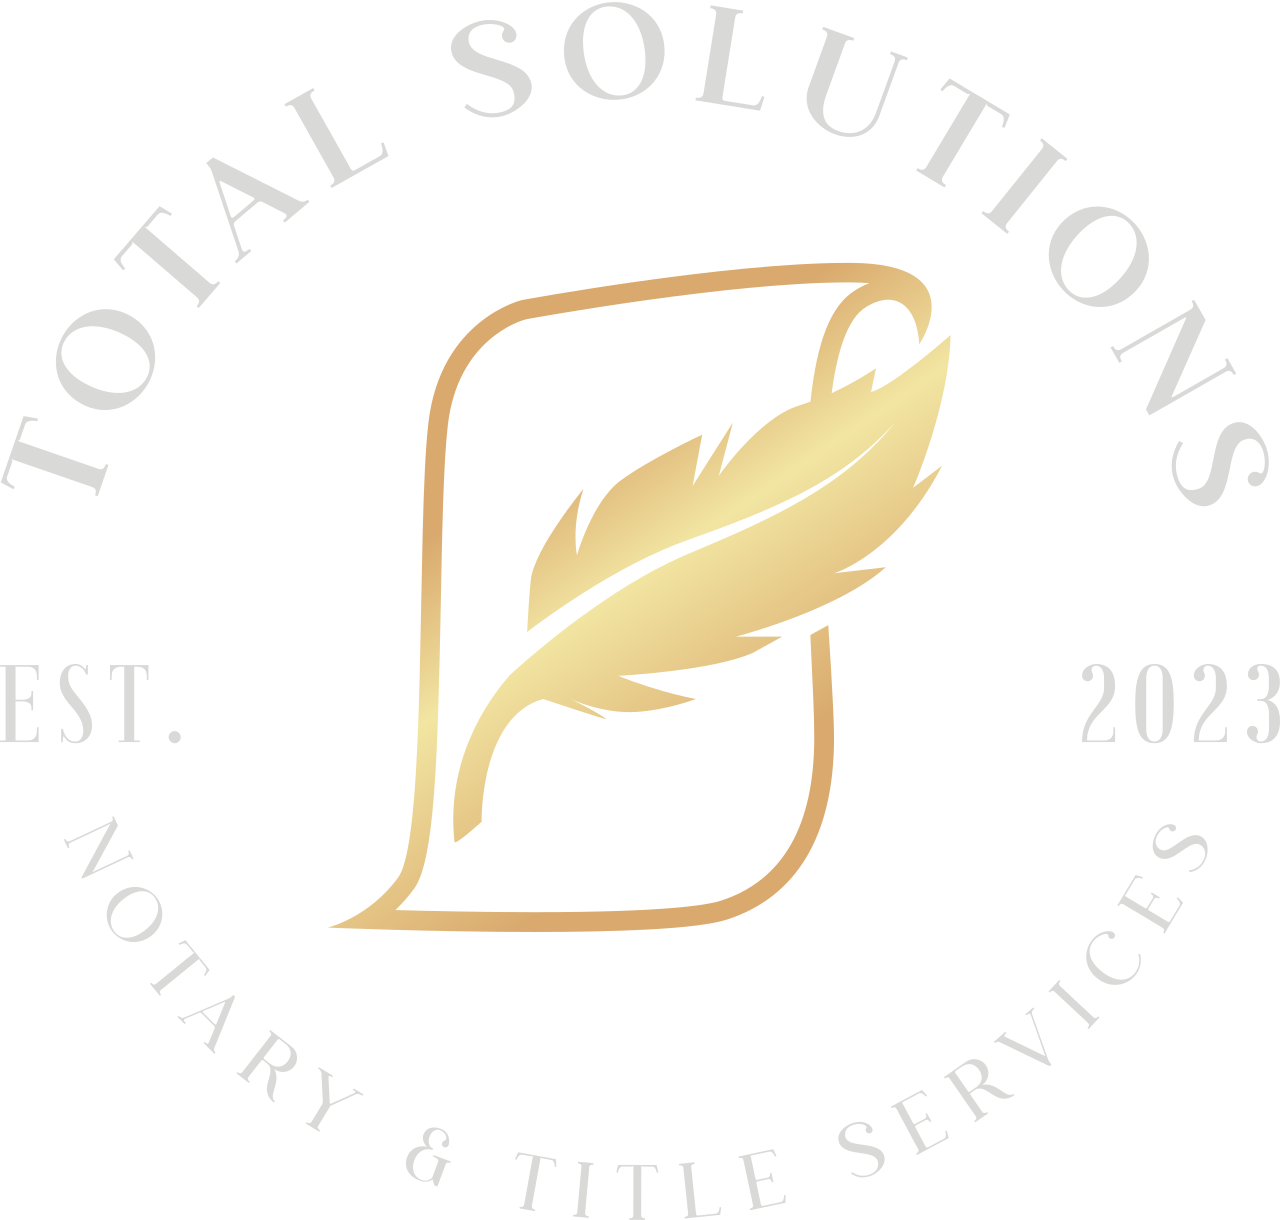 TOTAL SOLUTIONS's logo